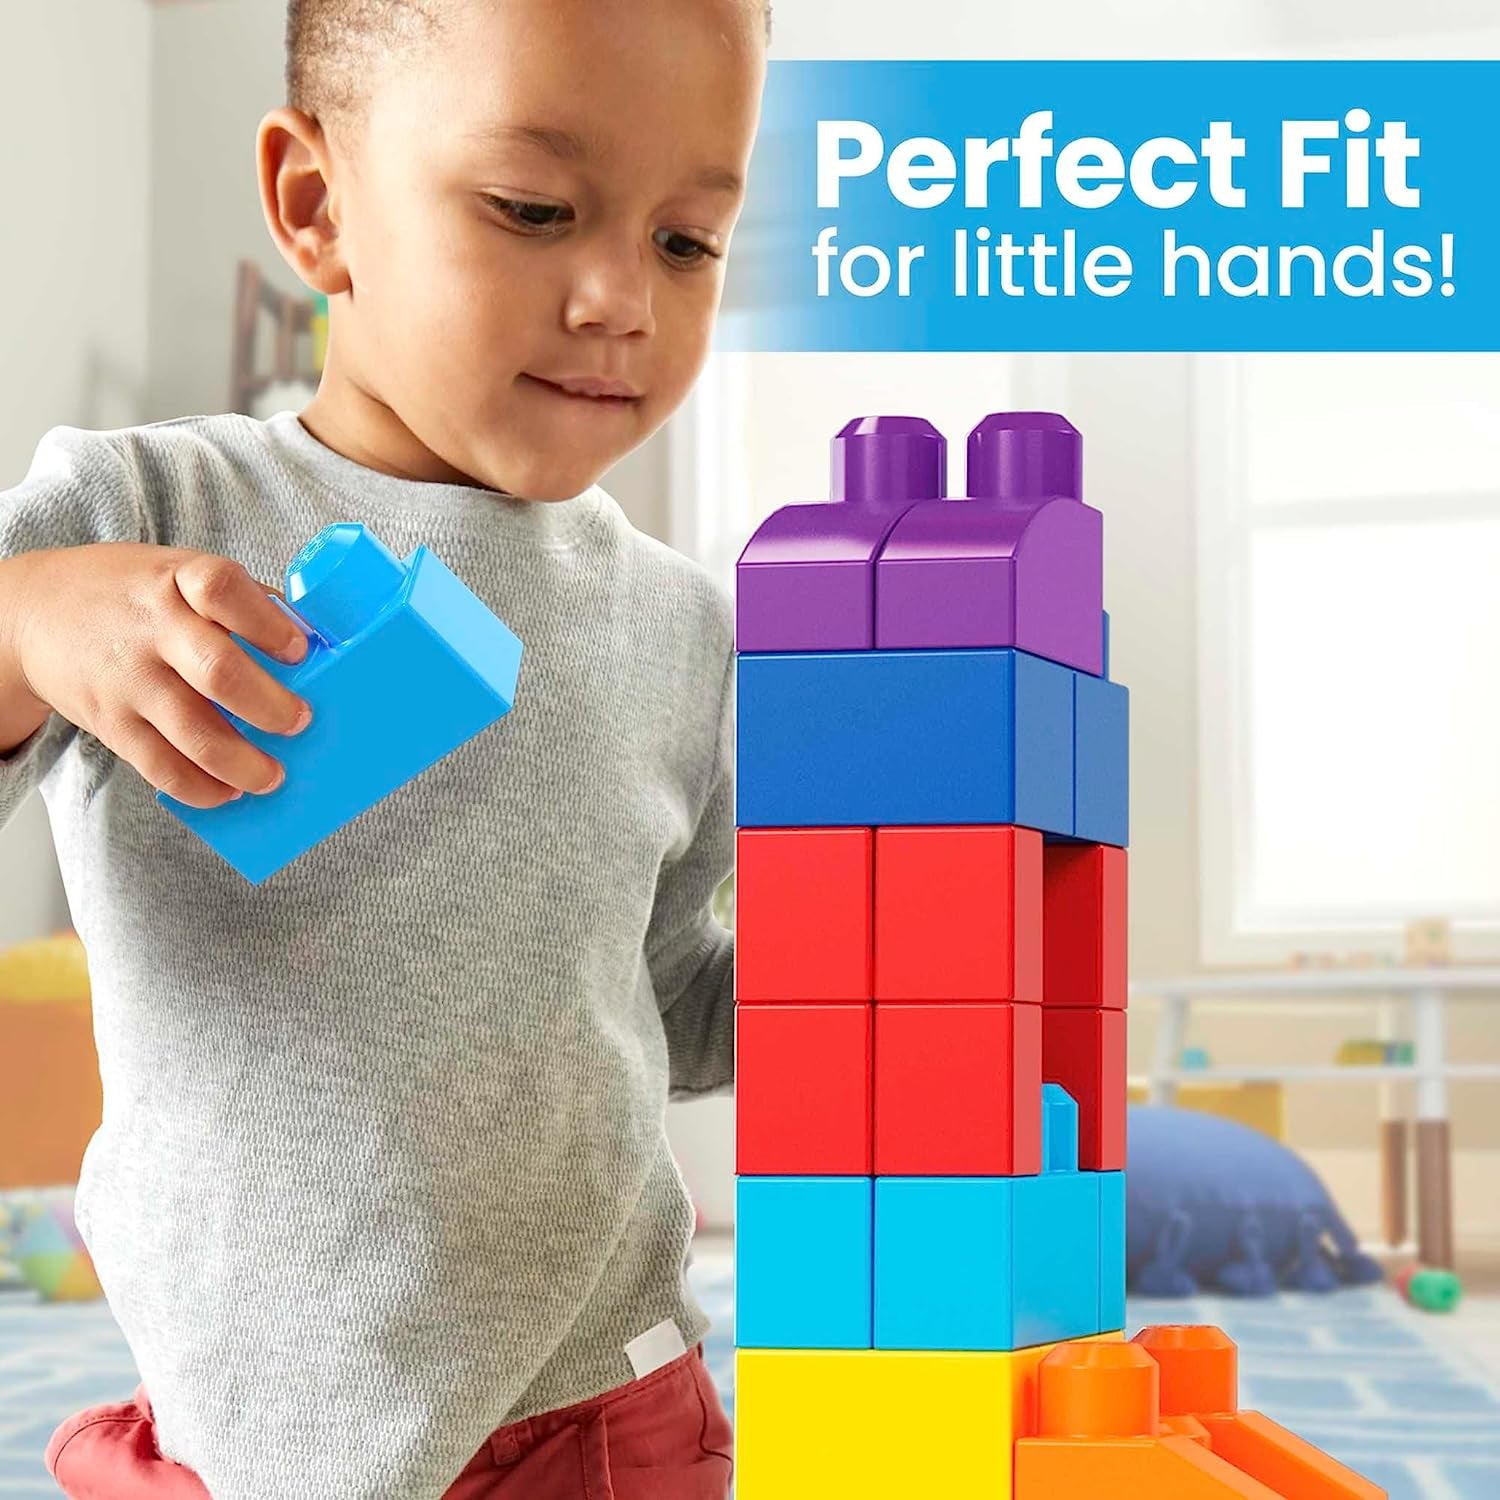 MEGA BLOKS Fisher-Price Toddler Block Toys, Big Building Bag with 80 Pieces and Storage Bag, Blue, Gift Ideas for Kids Age 1+ Years